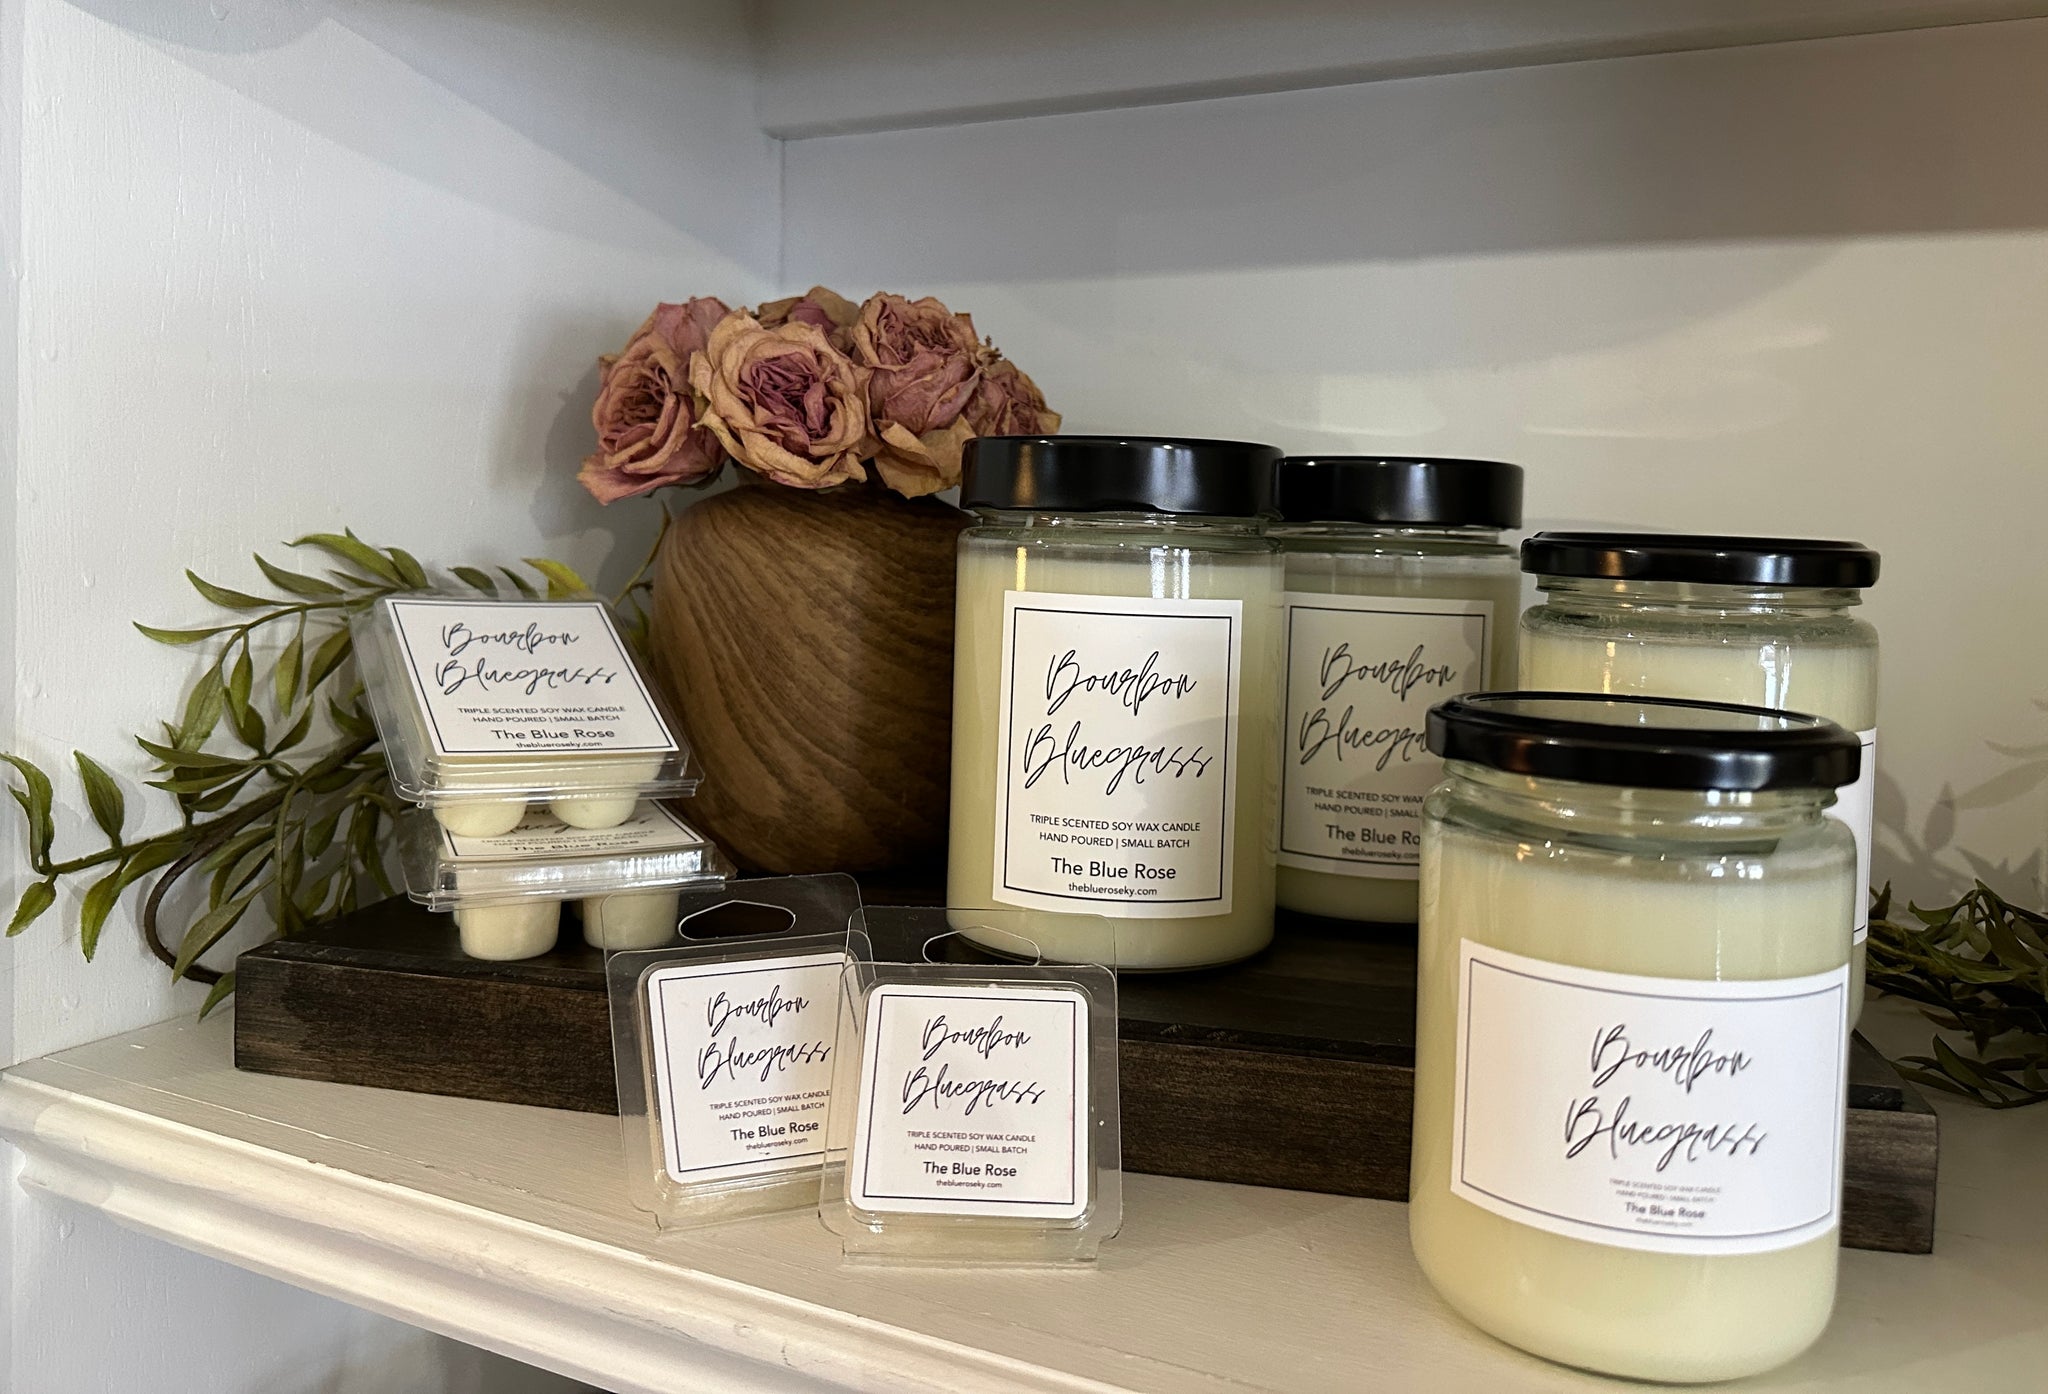 Bourbon Bluegrass Candle Collection - Jar Candle - Tin Candle - Wax Melts